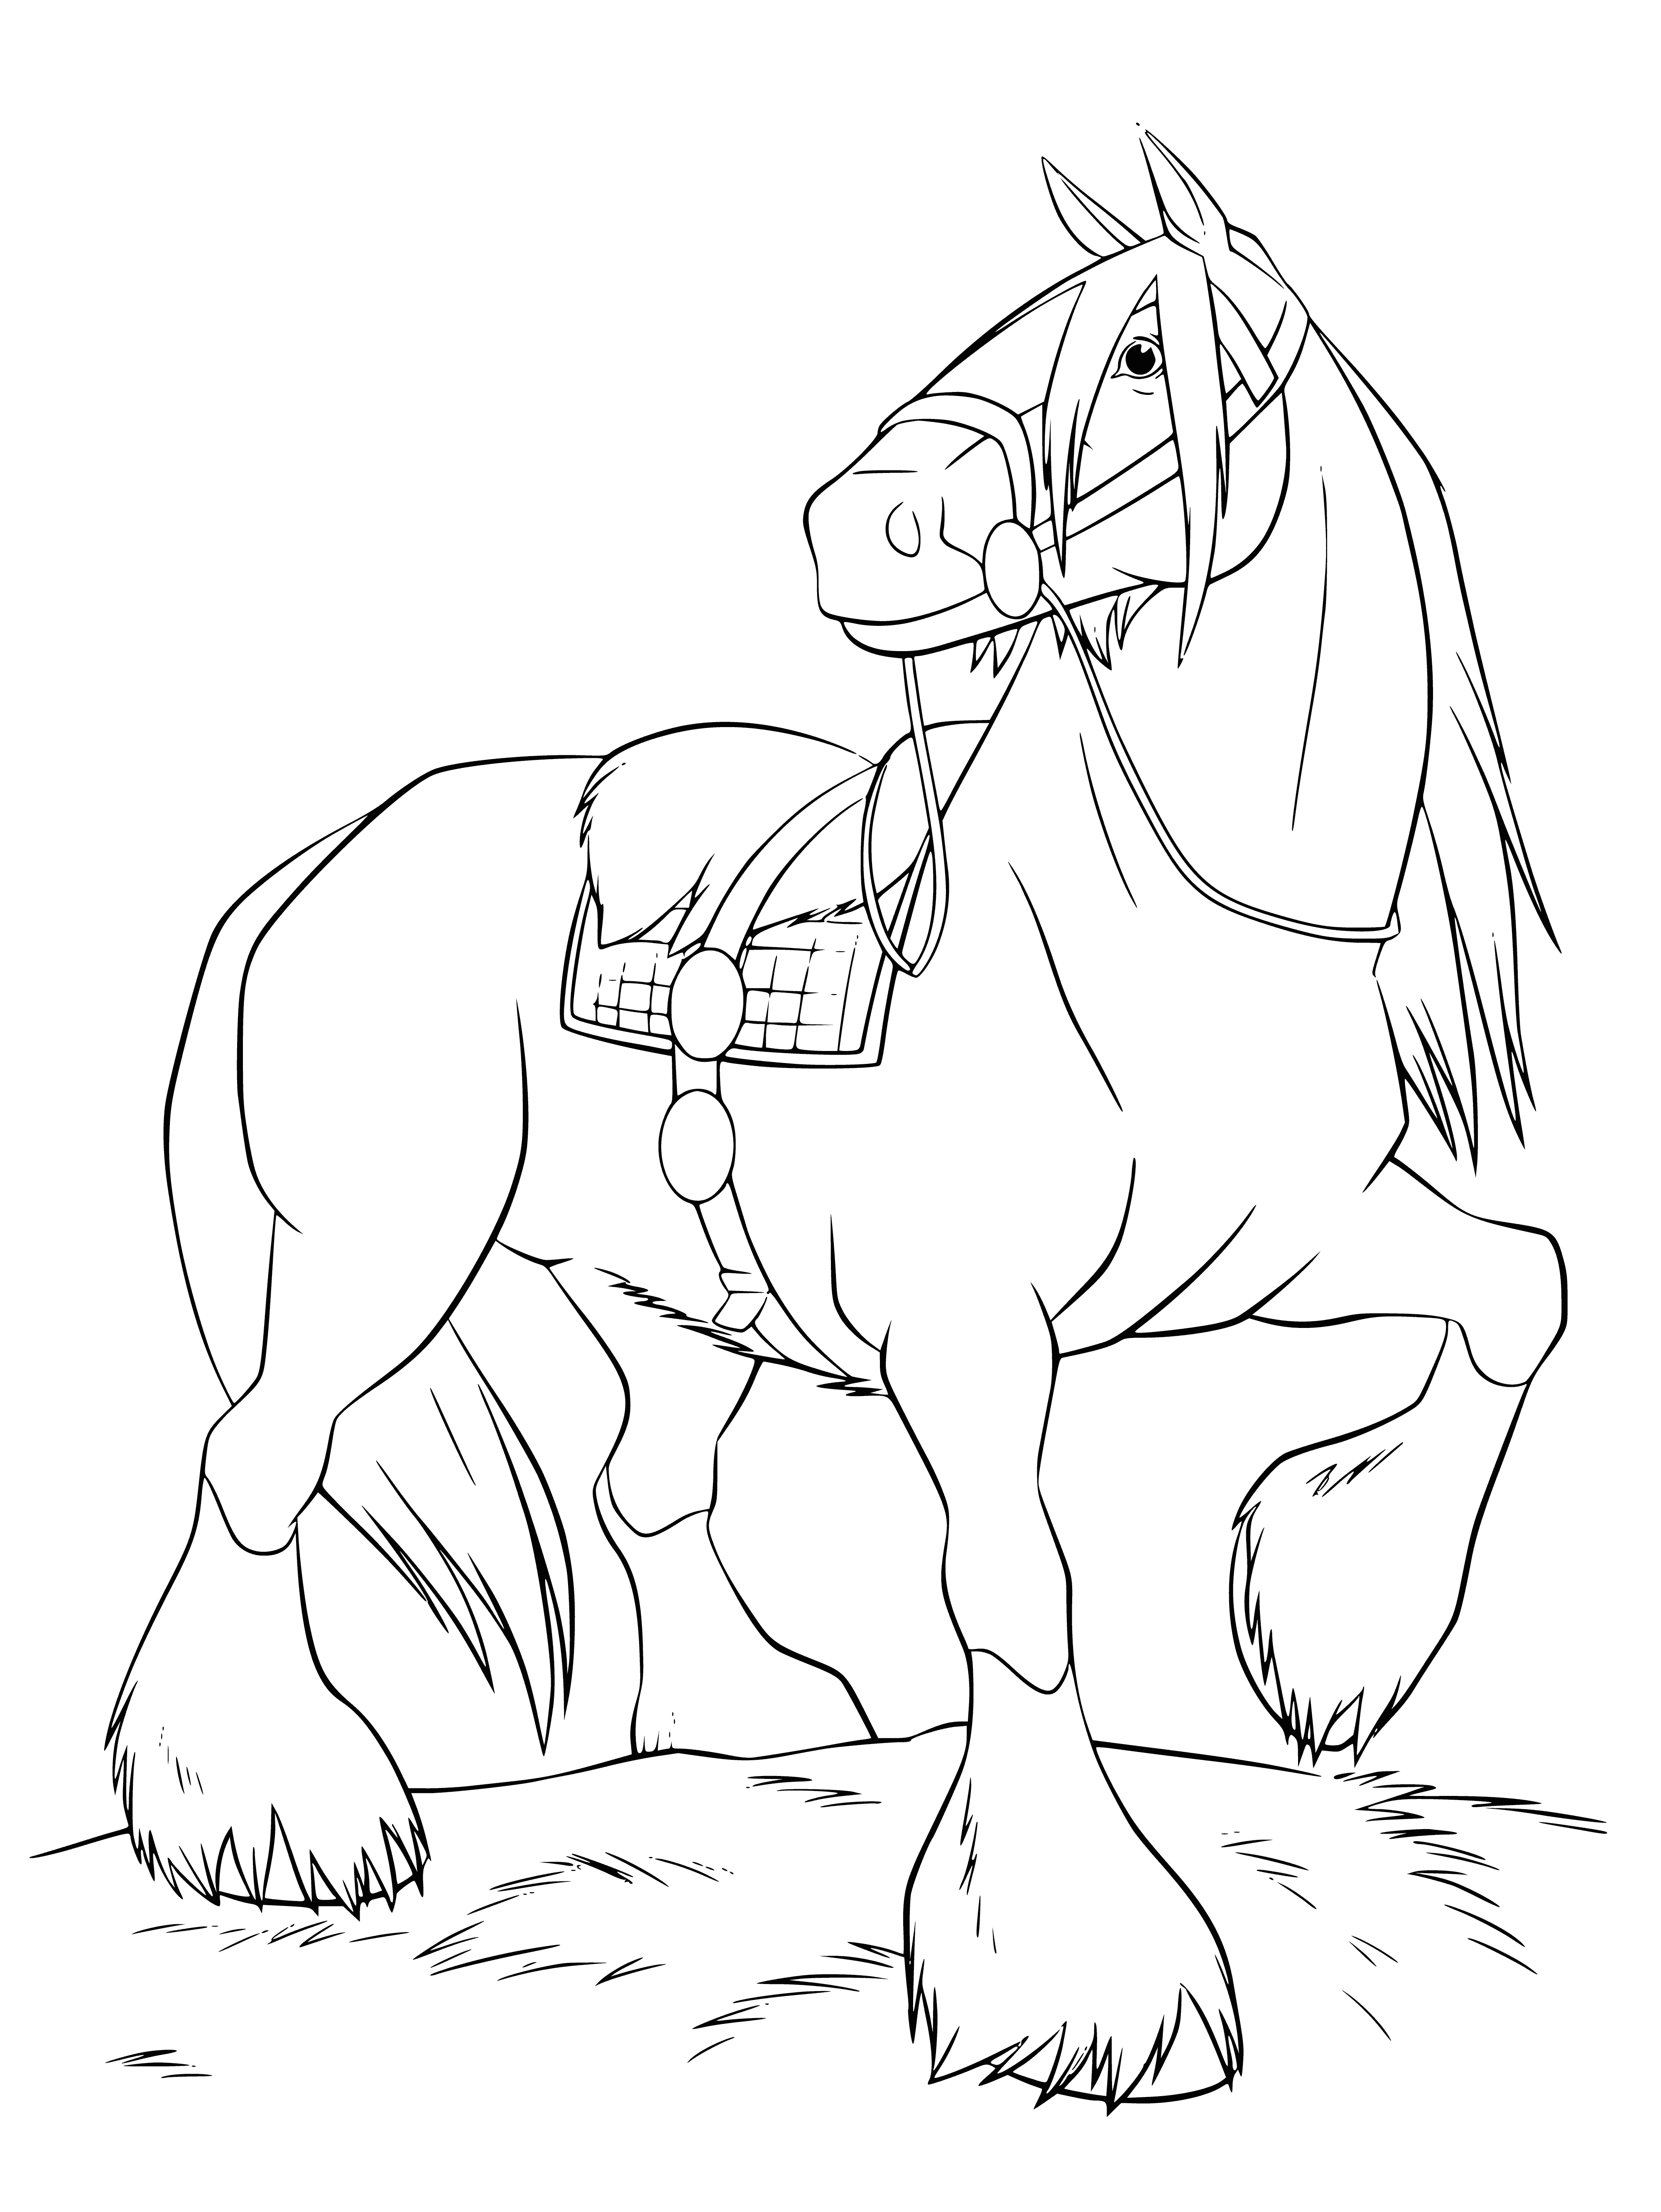 coloring page: A large dark brown horse stands in a pasture, looking at the camera, with a thick fur coat, long mane, and tail. #horse #art #coloring #coloring page